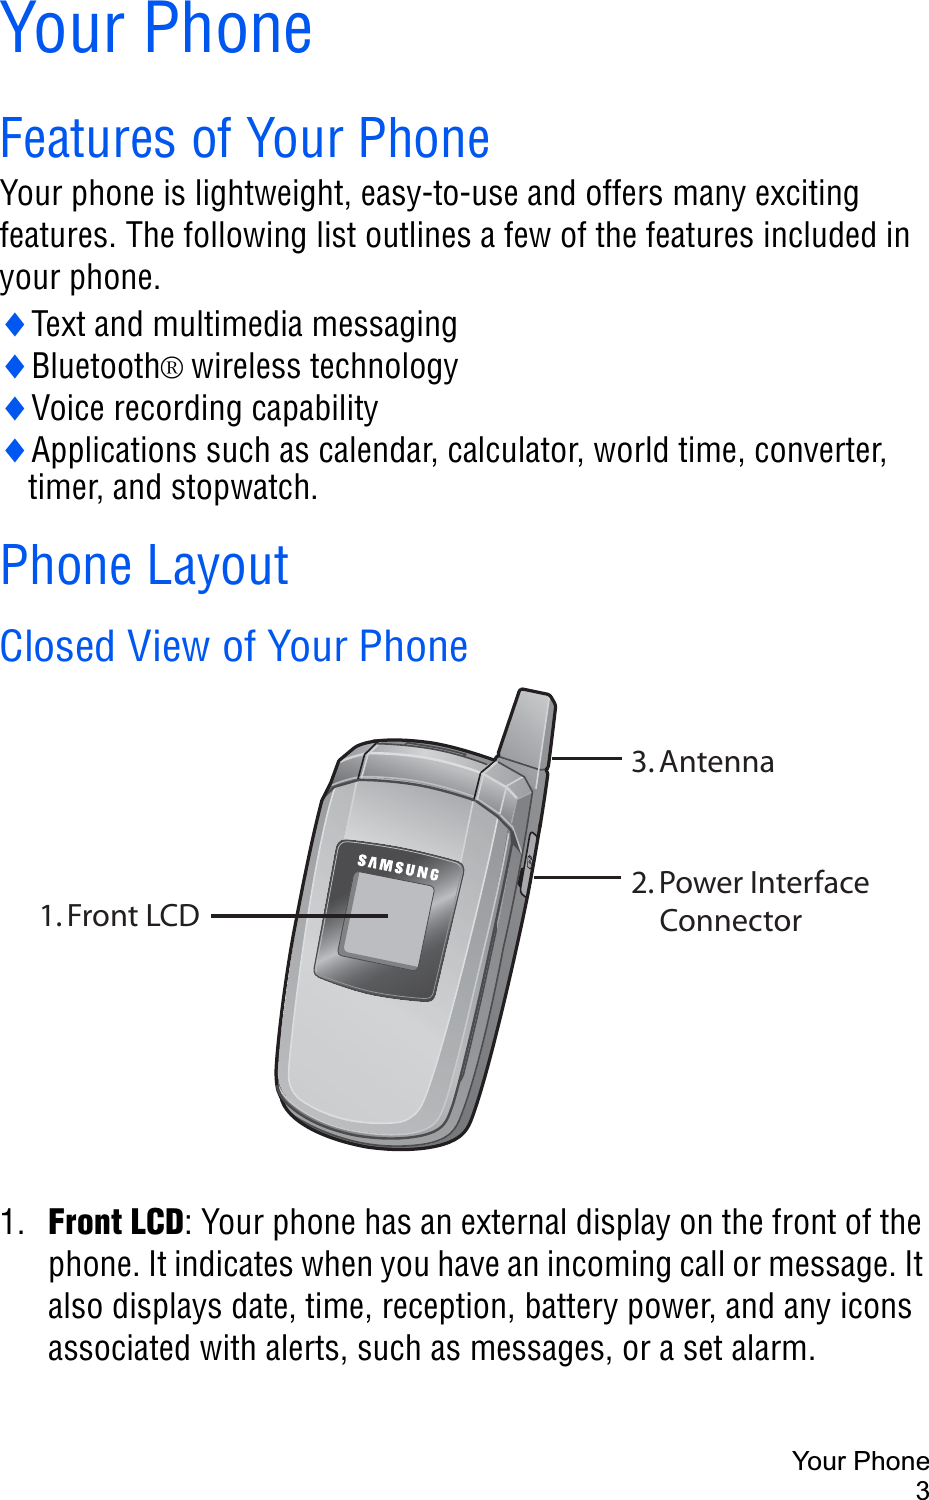 Your Phone3Your PhoneFeatures of Your PhoneYour phone is lightweight, easy-to-use and offers many exciting features. The following list outlines a few of the features included in your phone.iText and multimedia messagingiBluetooth®wireless technologyiVoice recording capabilityiApplications such as calendar, calculator, world time, converter, timer, and stopwatch.Phone LayoutClosed View of Your Phone1. Front LCD: Your phone has an external display on the front of the phone. It indicates when you have an incoming call or message. It also displays date, time, reception, battery power, and any icons associated with alerts, such as messages, or a set alarm.1. Front LCD3. Antenna2. Power InterfaceConnector